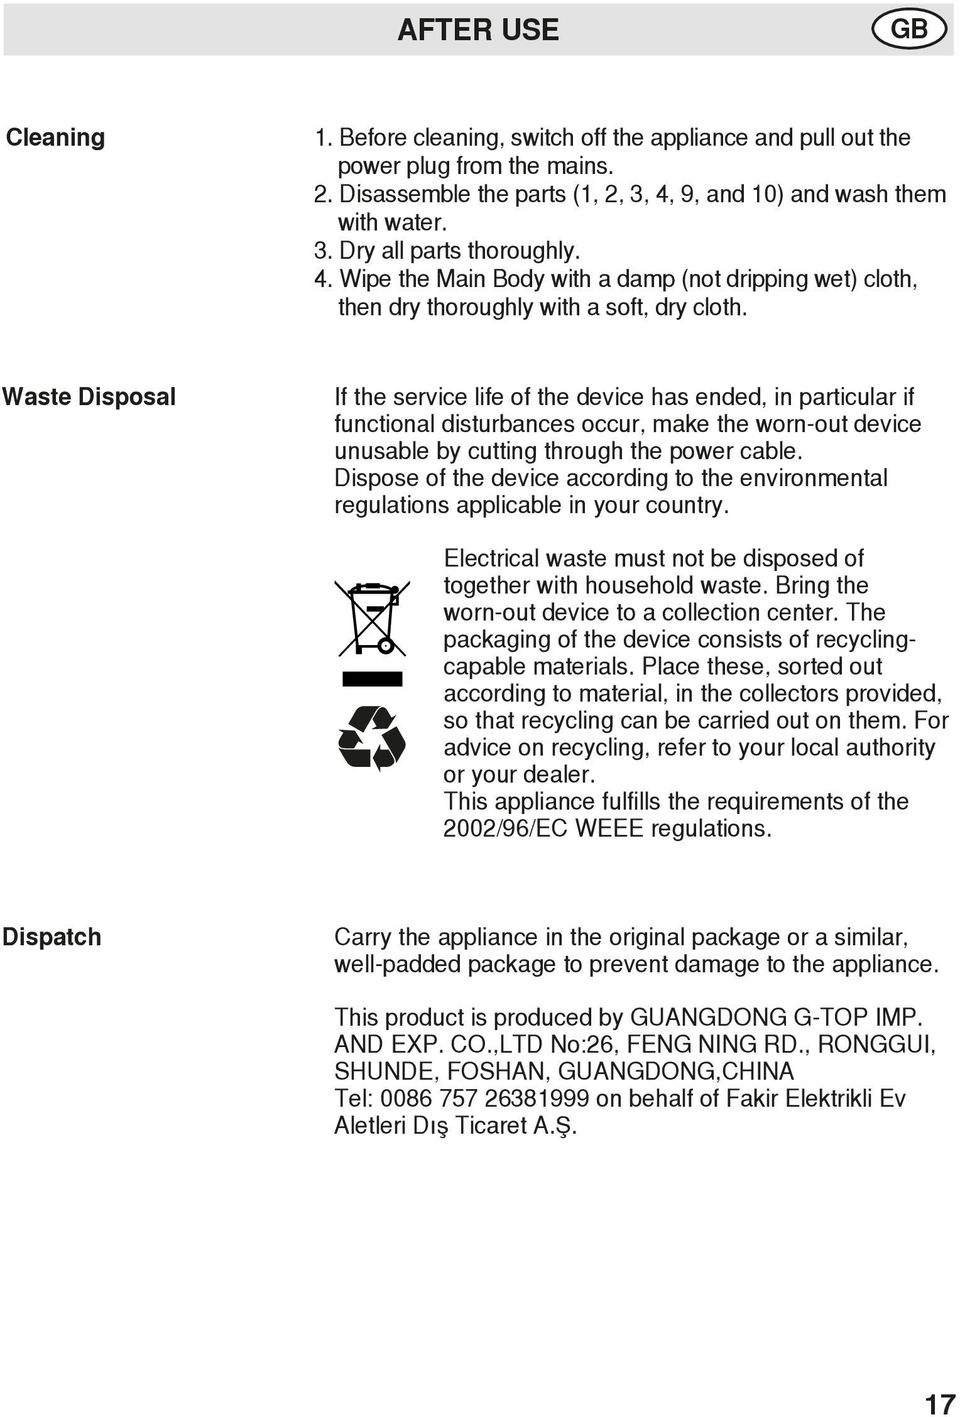 Waste Disposal If the service life of the device has ended, in particular if functional disturbances occur, make the worn-out device unusable by cutting through the power cable.